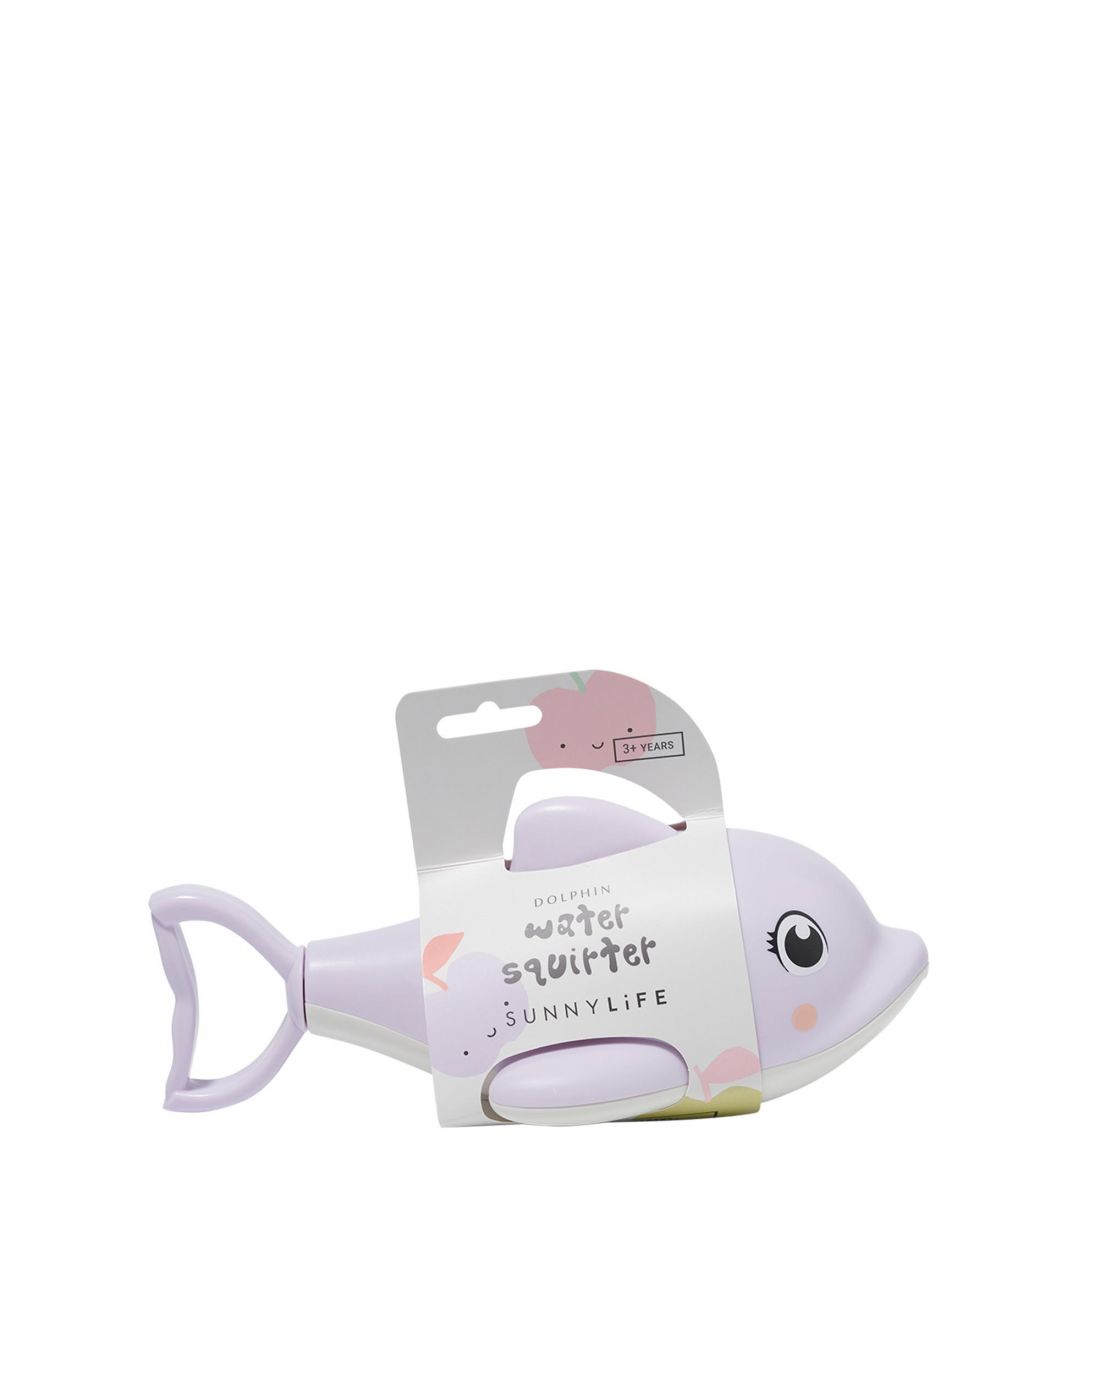 SunnyLife Water Squirters Dolphin Pastel Lilac